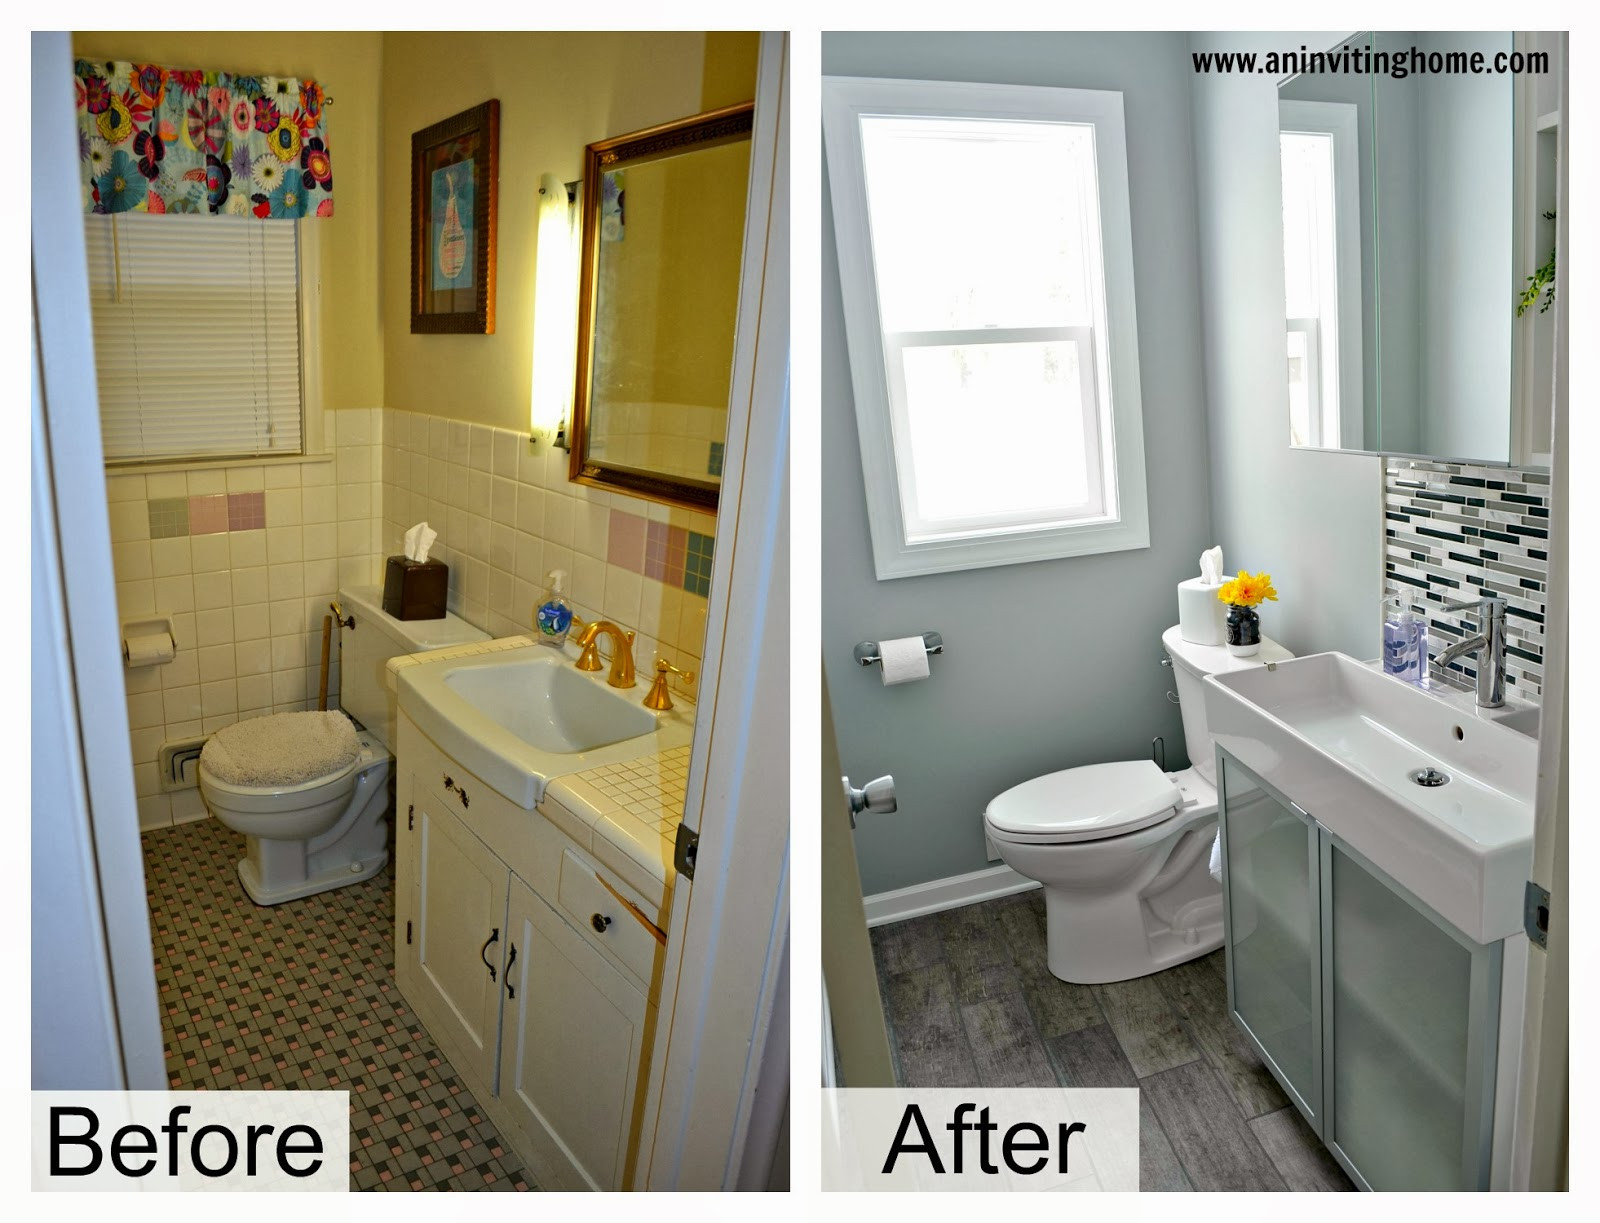 Bathroom Remodel Before And After
 Remodelaholic